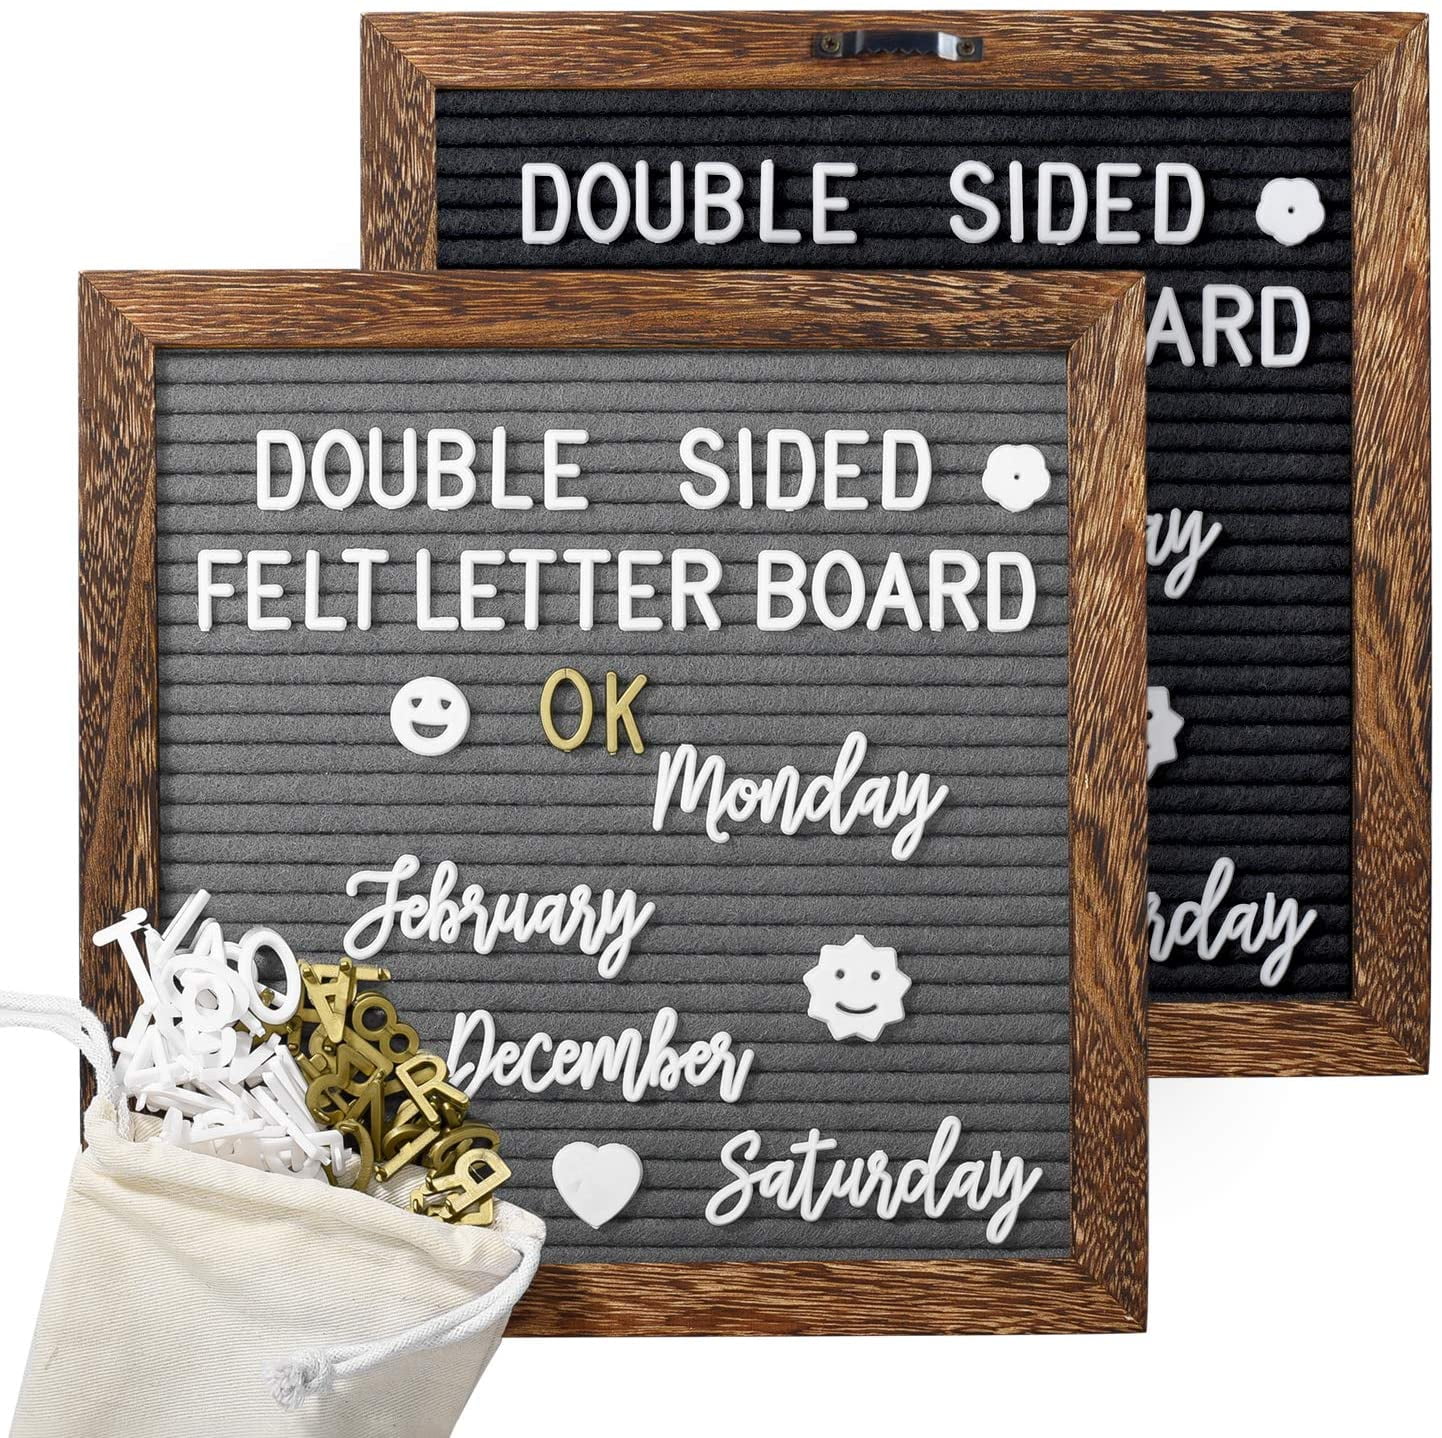 Download Xinney Rustic Wood Frame Felt Letters Boards Sign Changeable Message Bulletin Announcement Letterboard Vintage Farmhouse 10x10 Double Sided For Home Office Baby Pregnancy White Gold Lettering Walmart Com Walmart Com